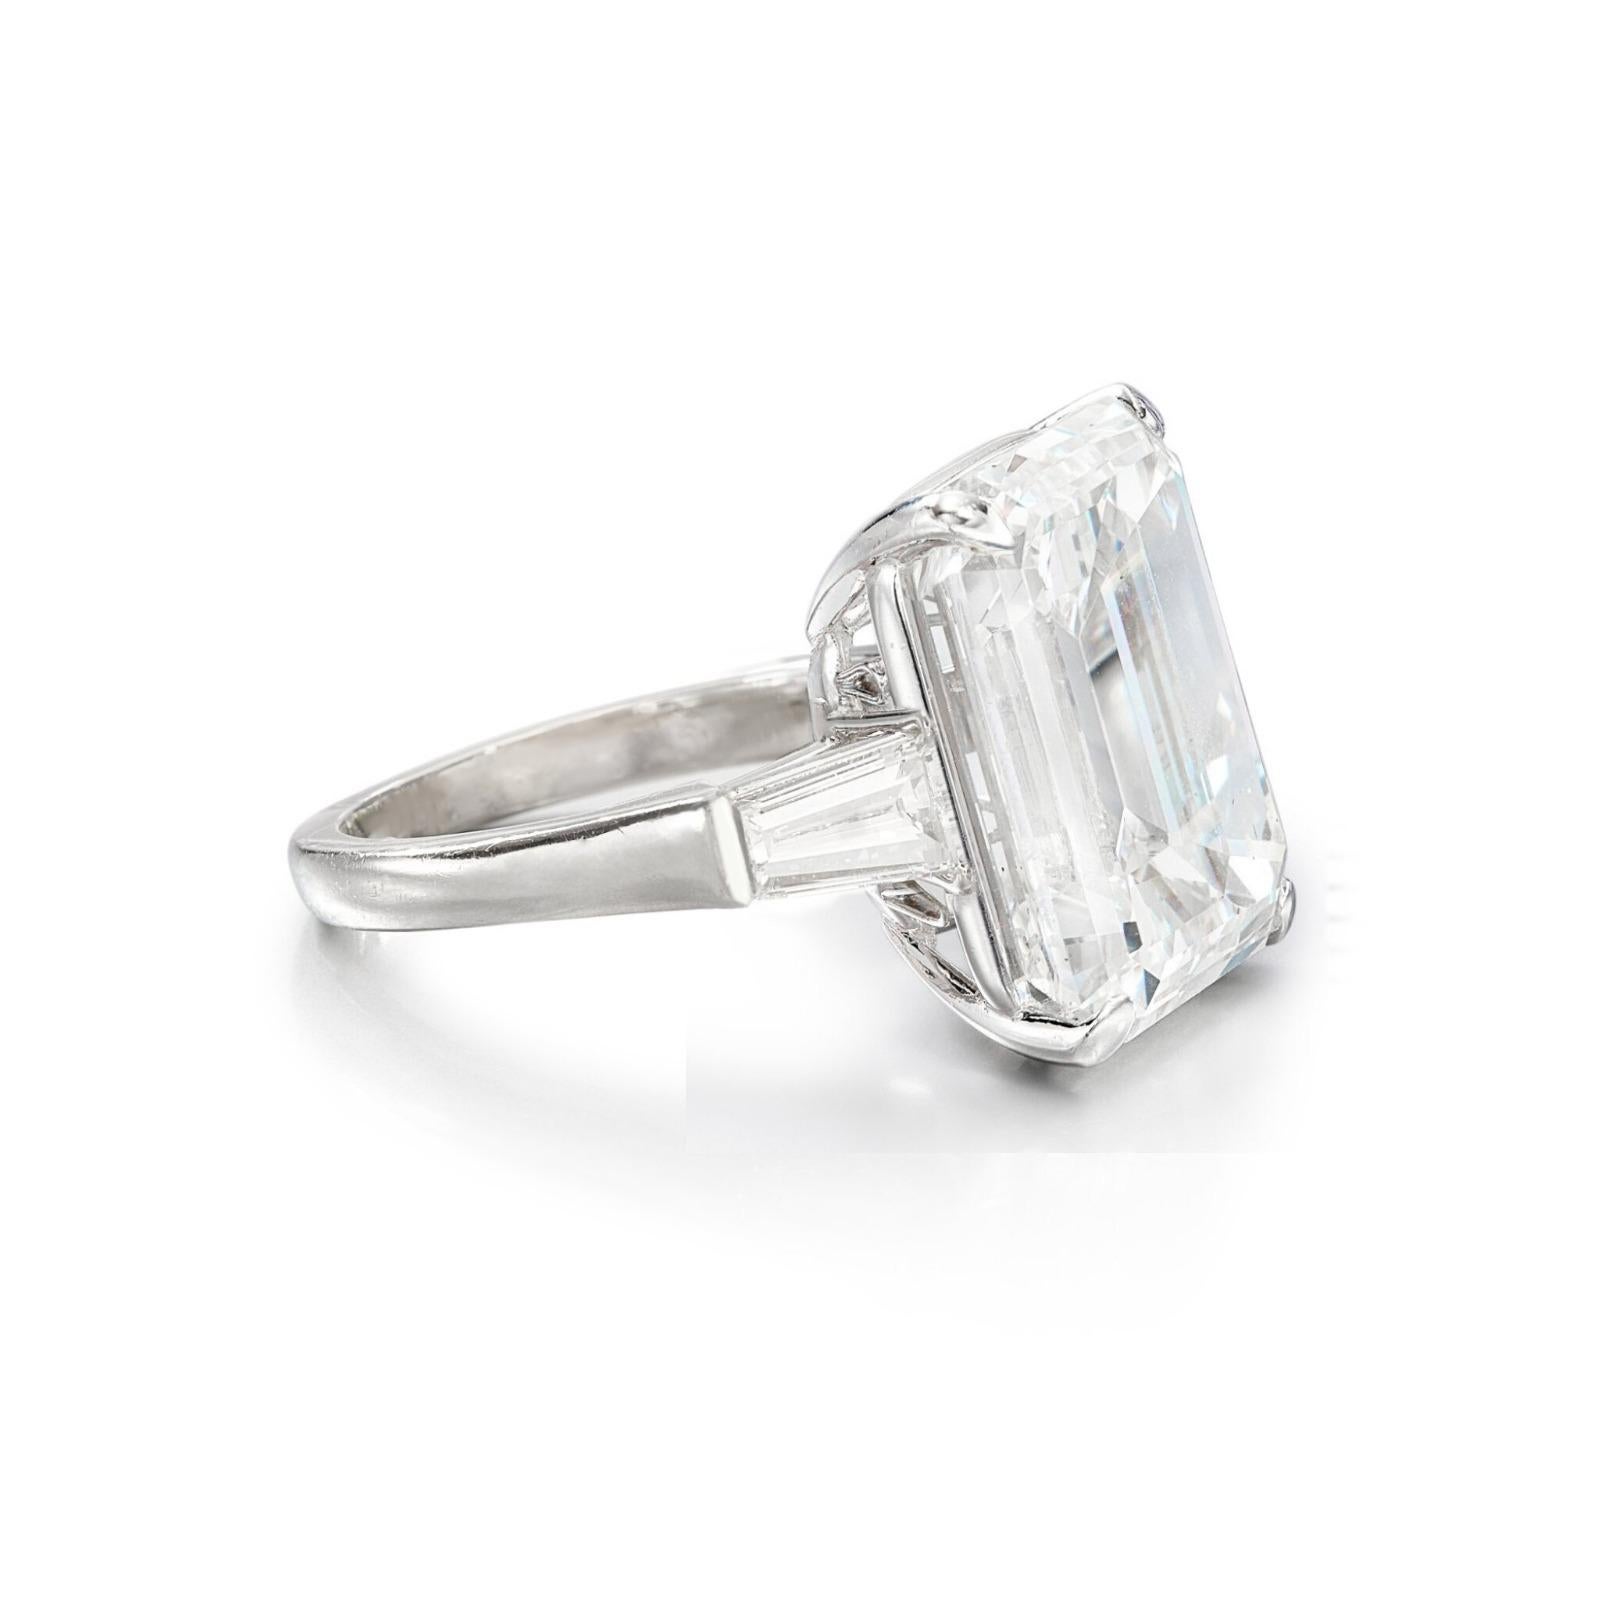 This exquisite ring features a magnificent 10-carat emerald-cut diamond as its centerpiece, certified by the renowned Gemological Institute of America (GIA). Graded F in color and VS1 in clarity, this stunning stone exudes unparalleled brilliance